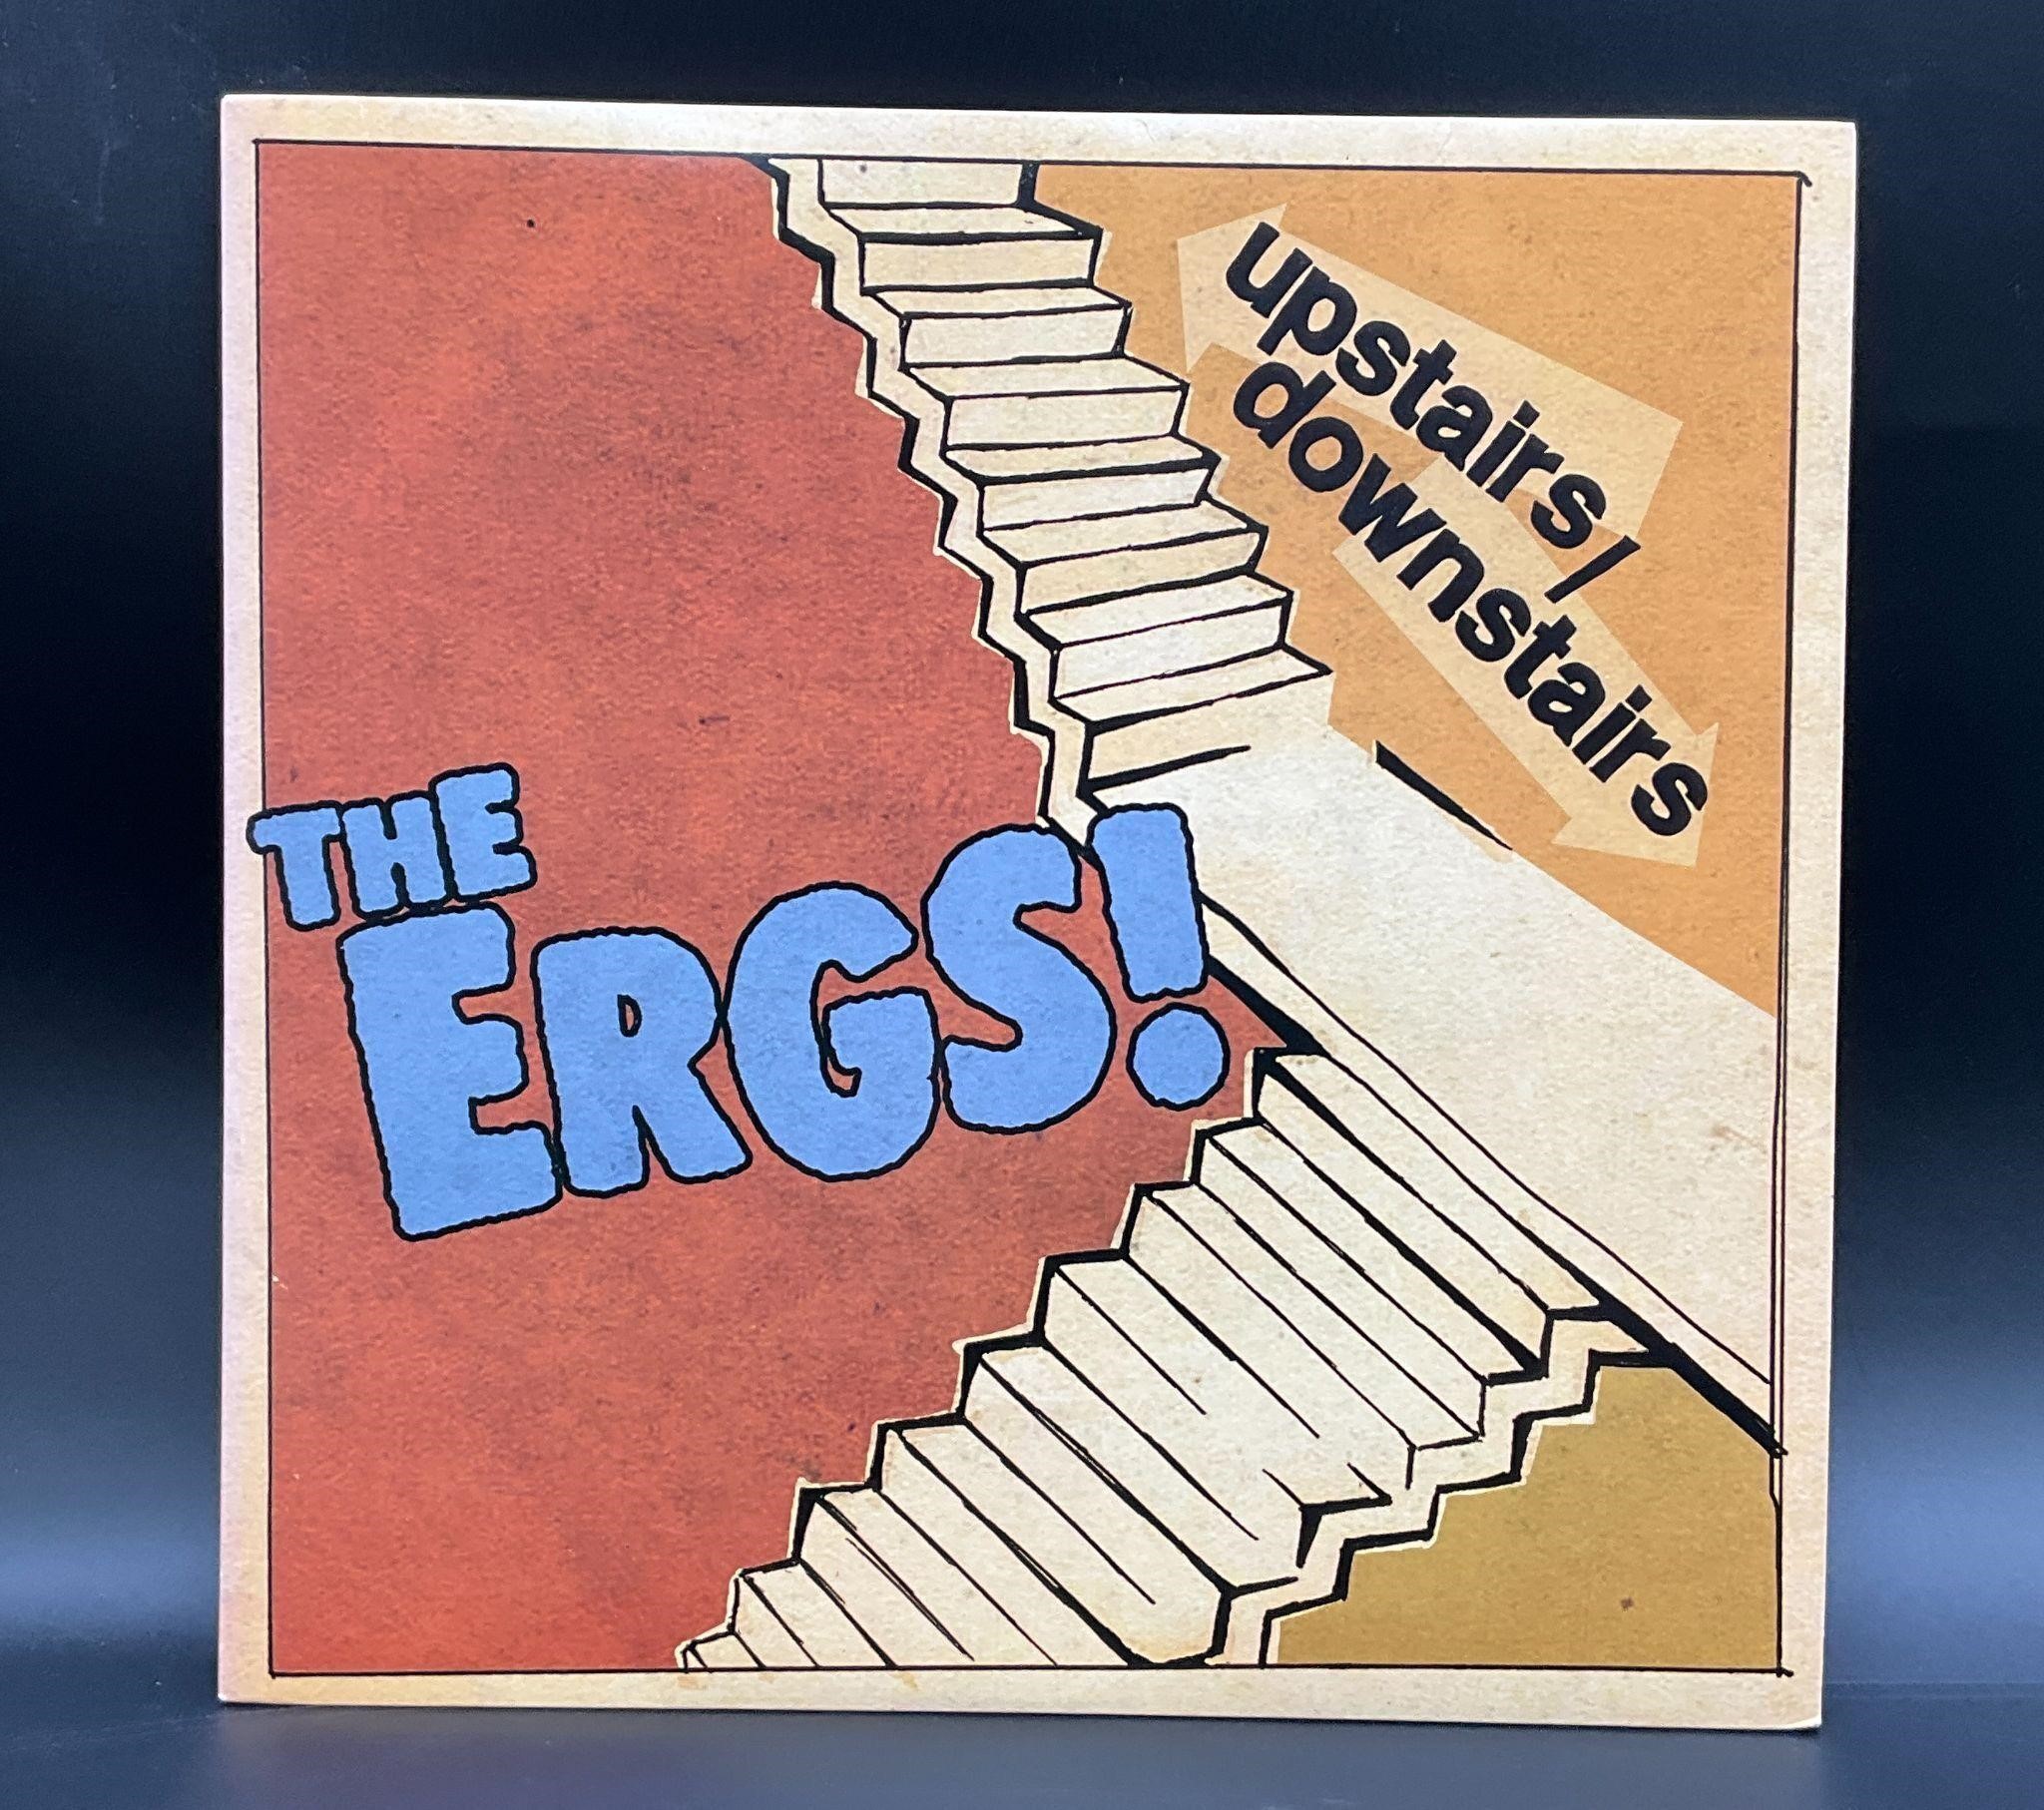 2007 The Ergs "Upstairs/Downstairs" Punk LP